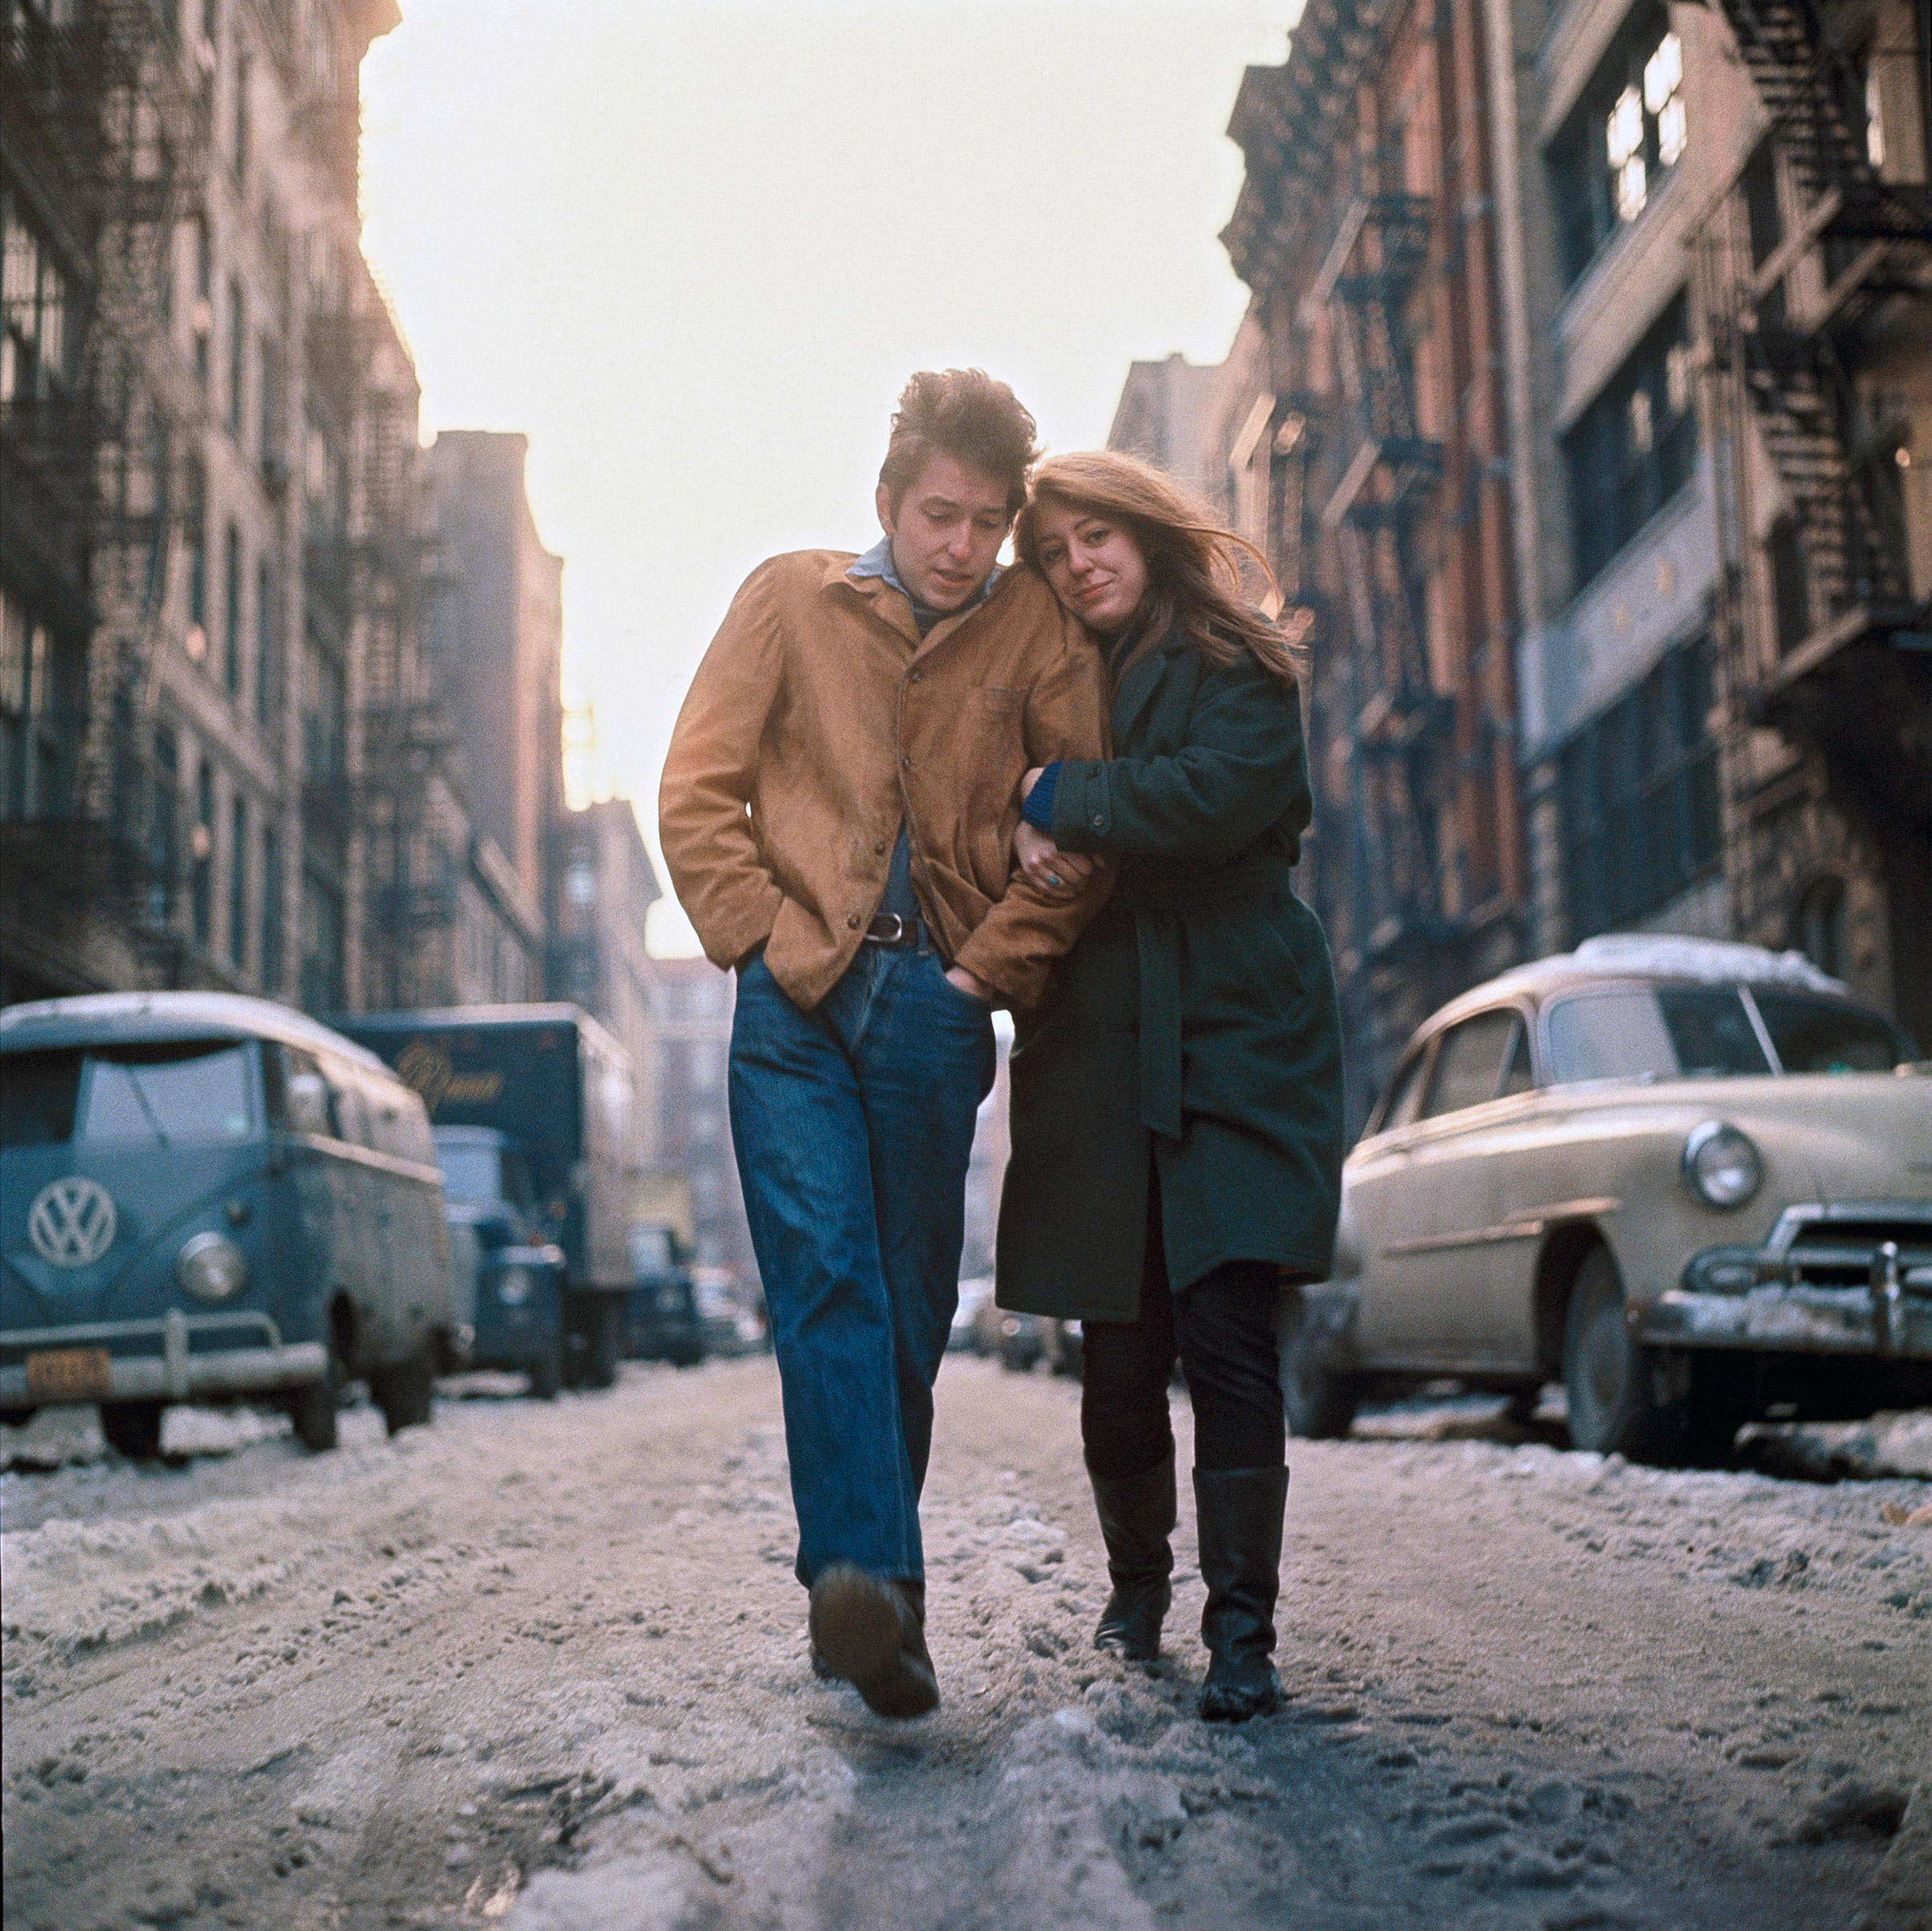 Bob Dylan and Suze Rotolo, 1963. This photo was used as the album cover for 'Freewheelin' with Bob Dylan.' (Don Hunstein)